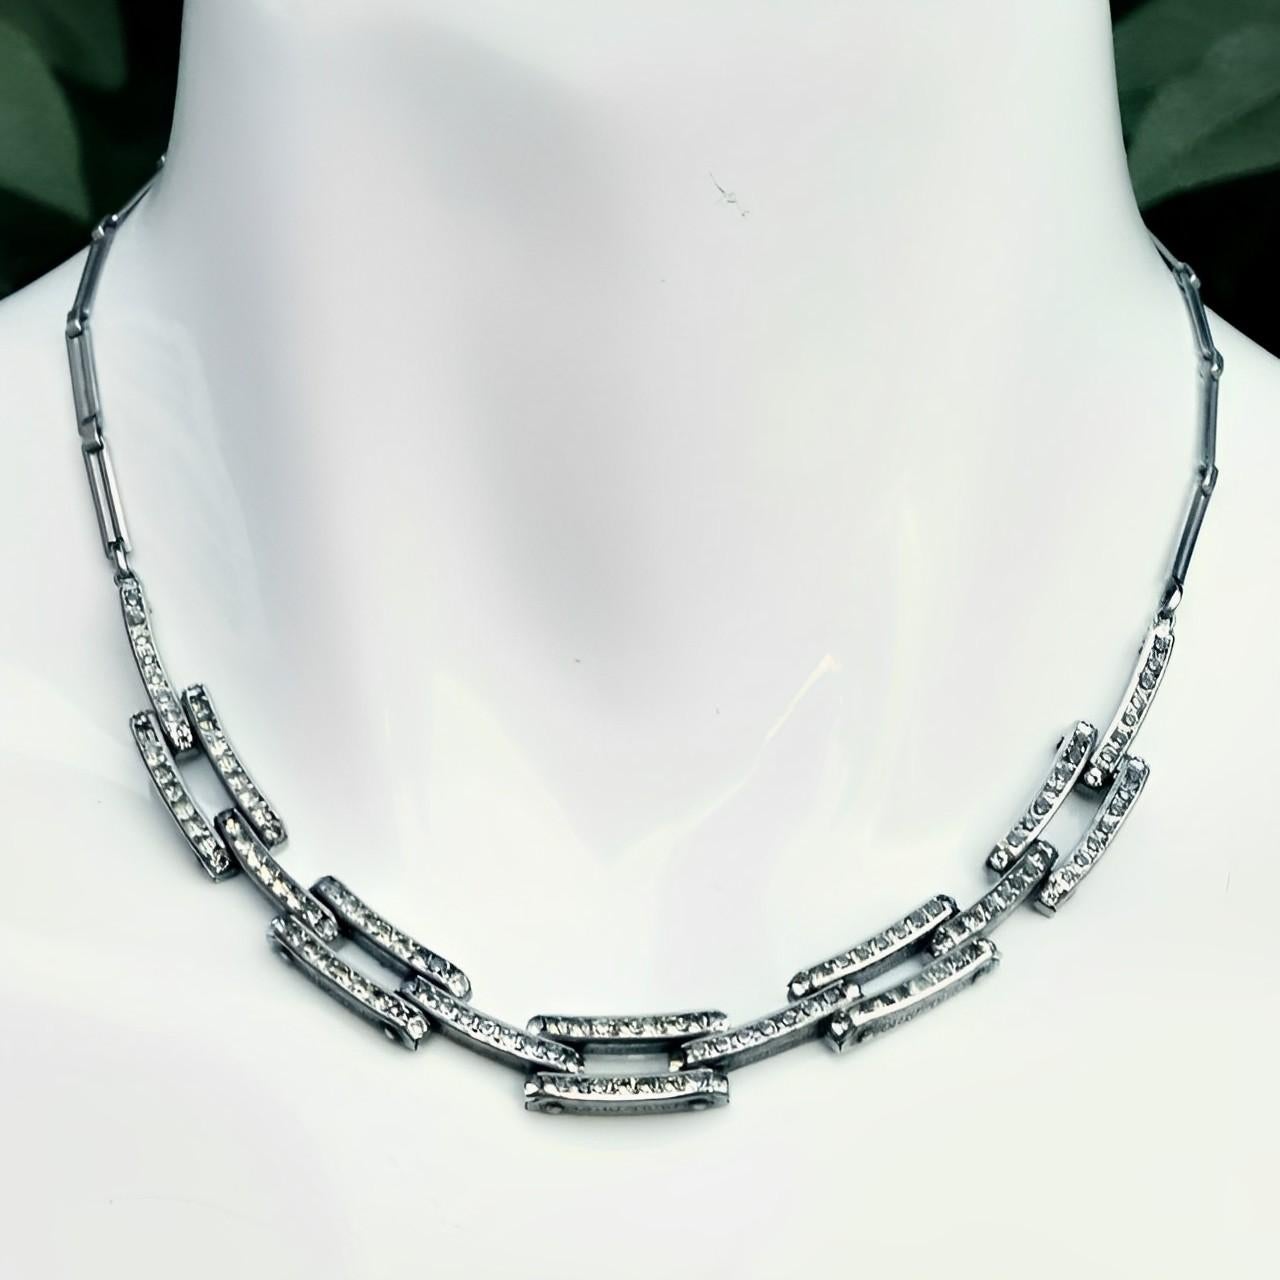 Schreiber & Hiller stylish Art Deco silver tone link necklace and bracelet set, featuring channel set rhinestones and ornate metalwork. There are nine rhinestones making up each link. The clasps work well.

The necklace is length approximately